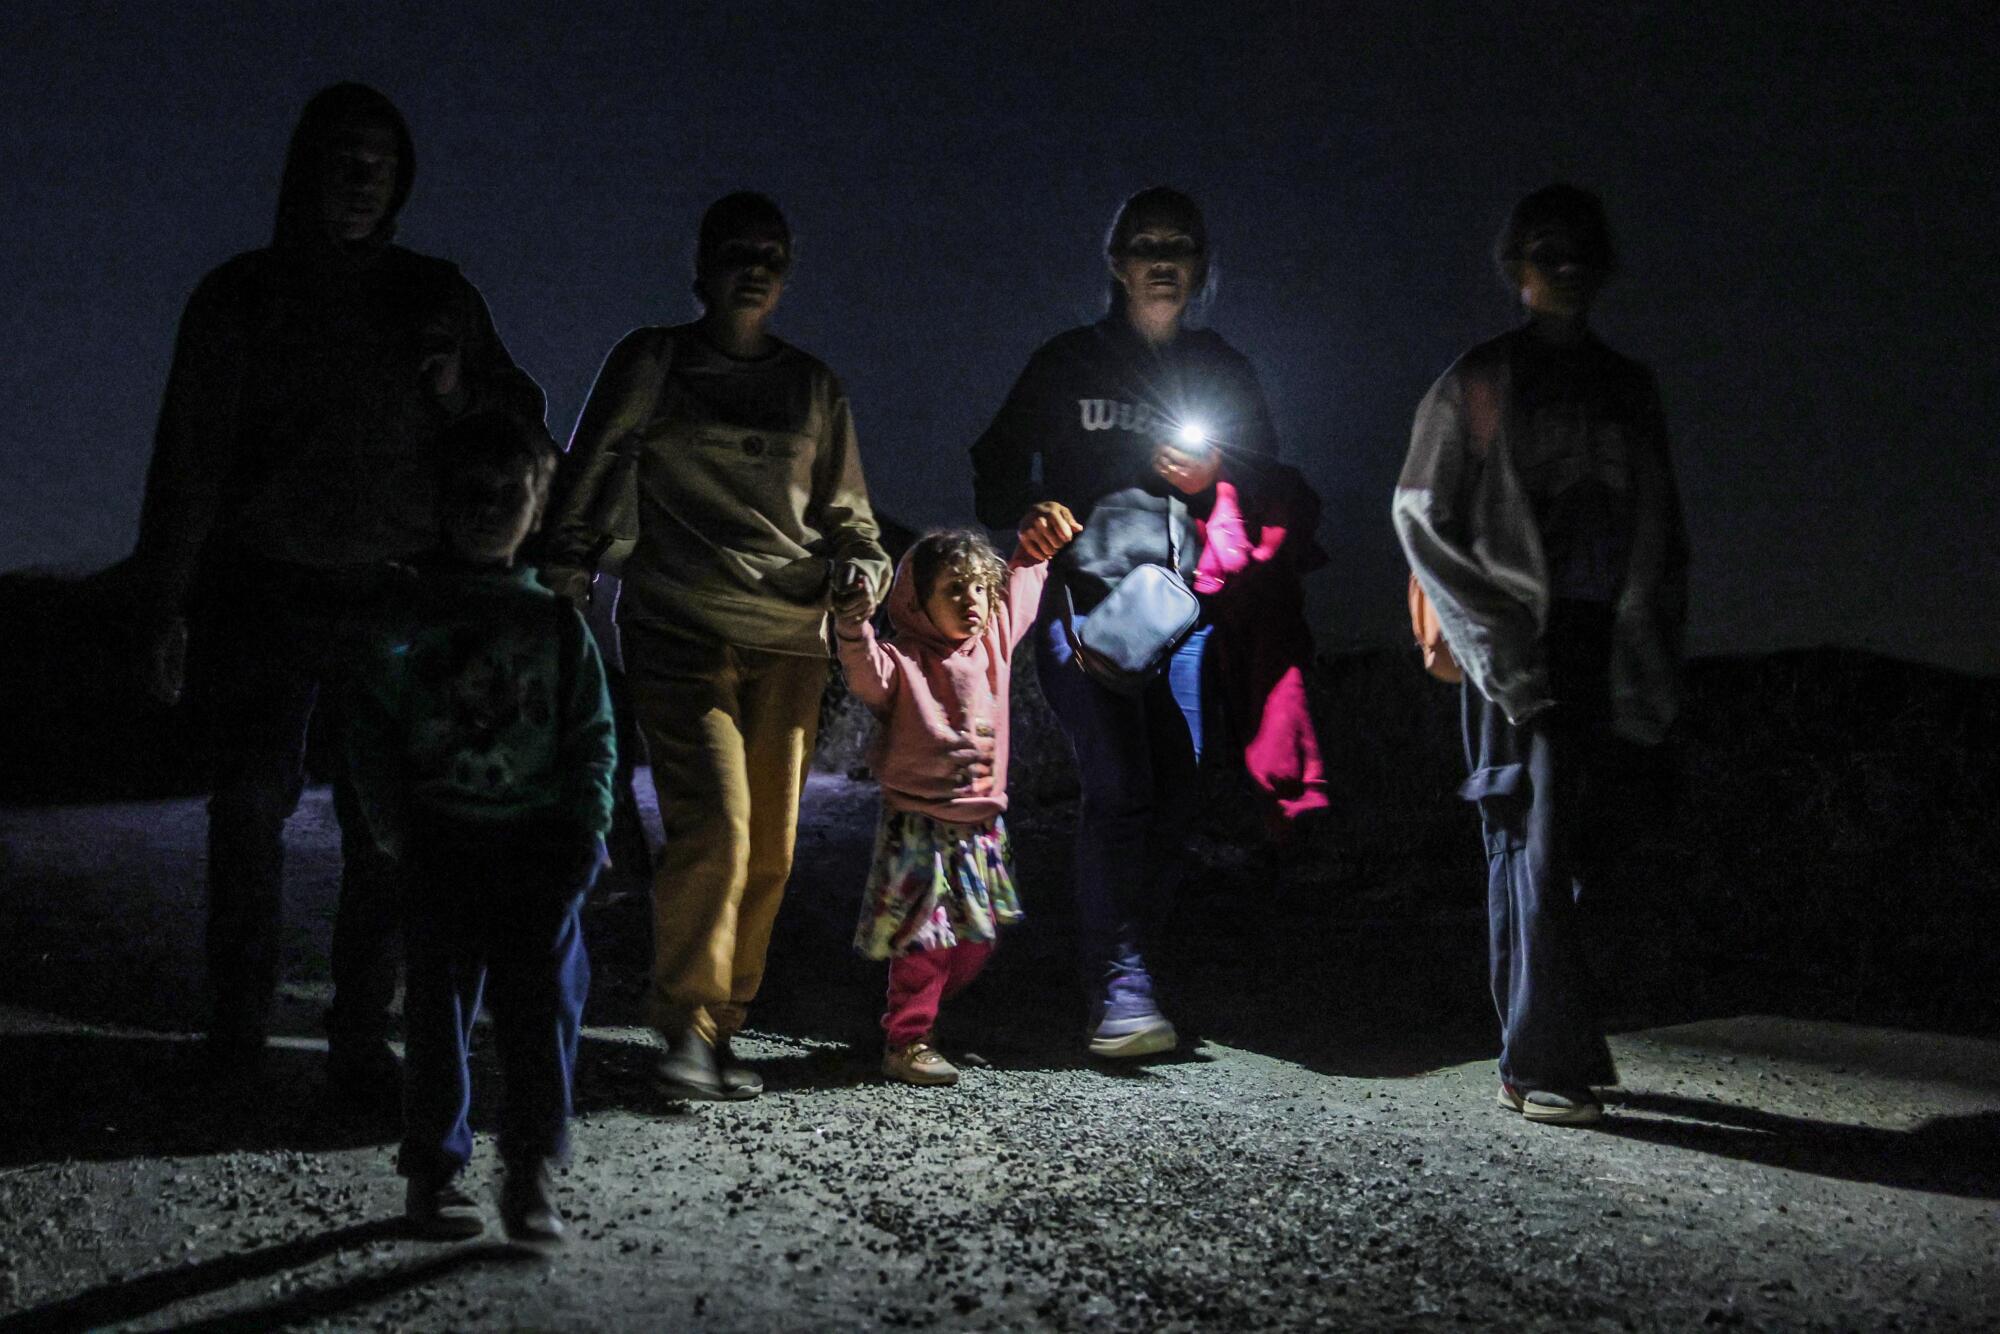 An exhausted family ends a more than nine-hour walk after crossing the border between the United States and Mexico.